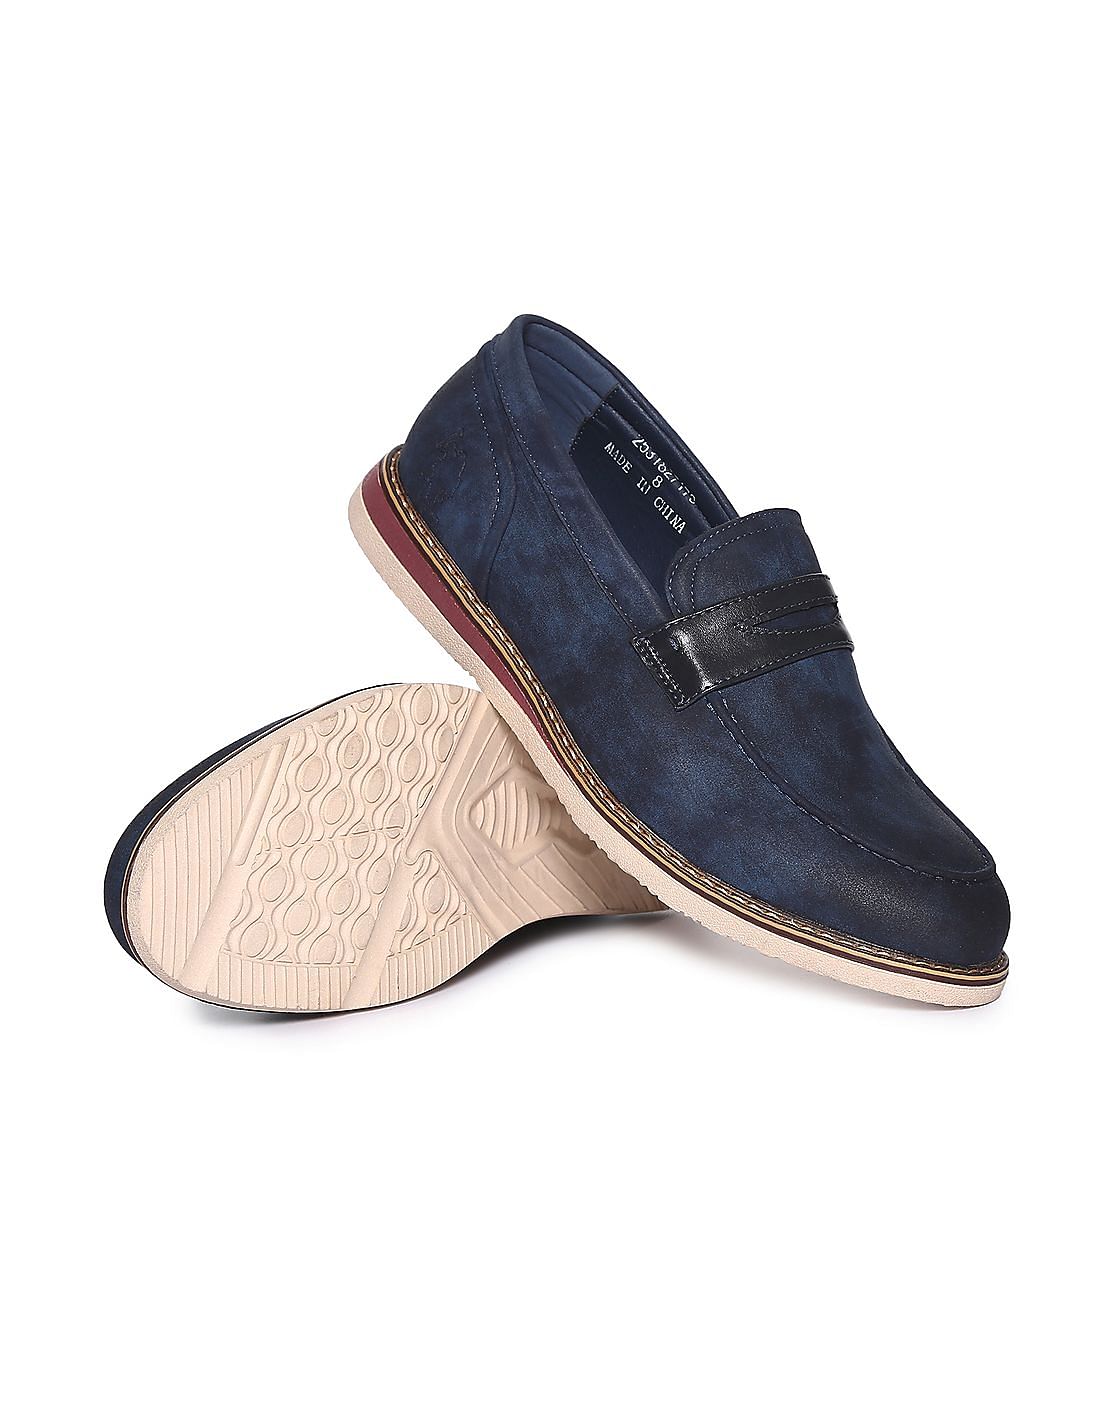 Buy U.S. Polo Assn. Contrast Sole Walter Penny Loafers - NNNOW.com